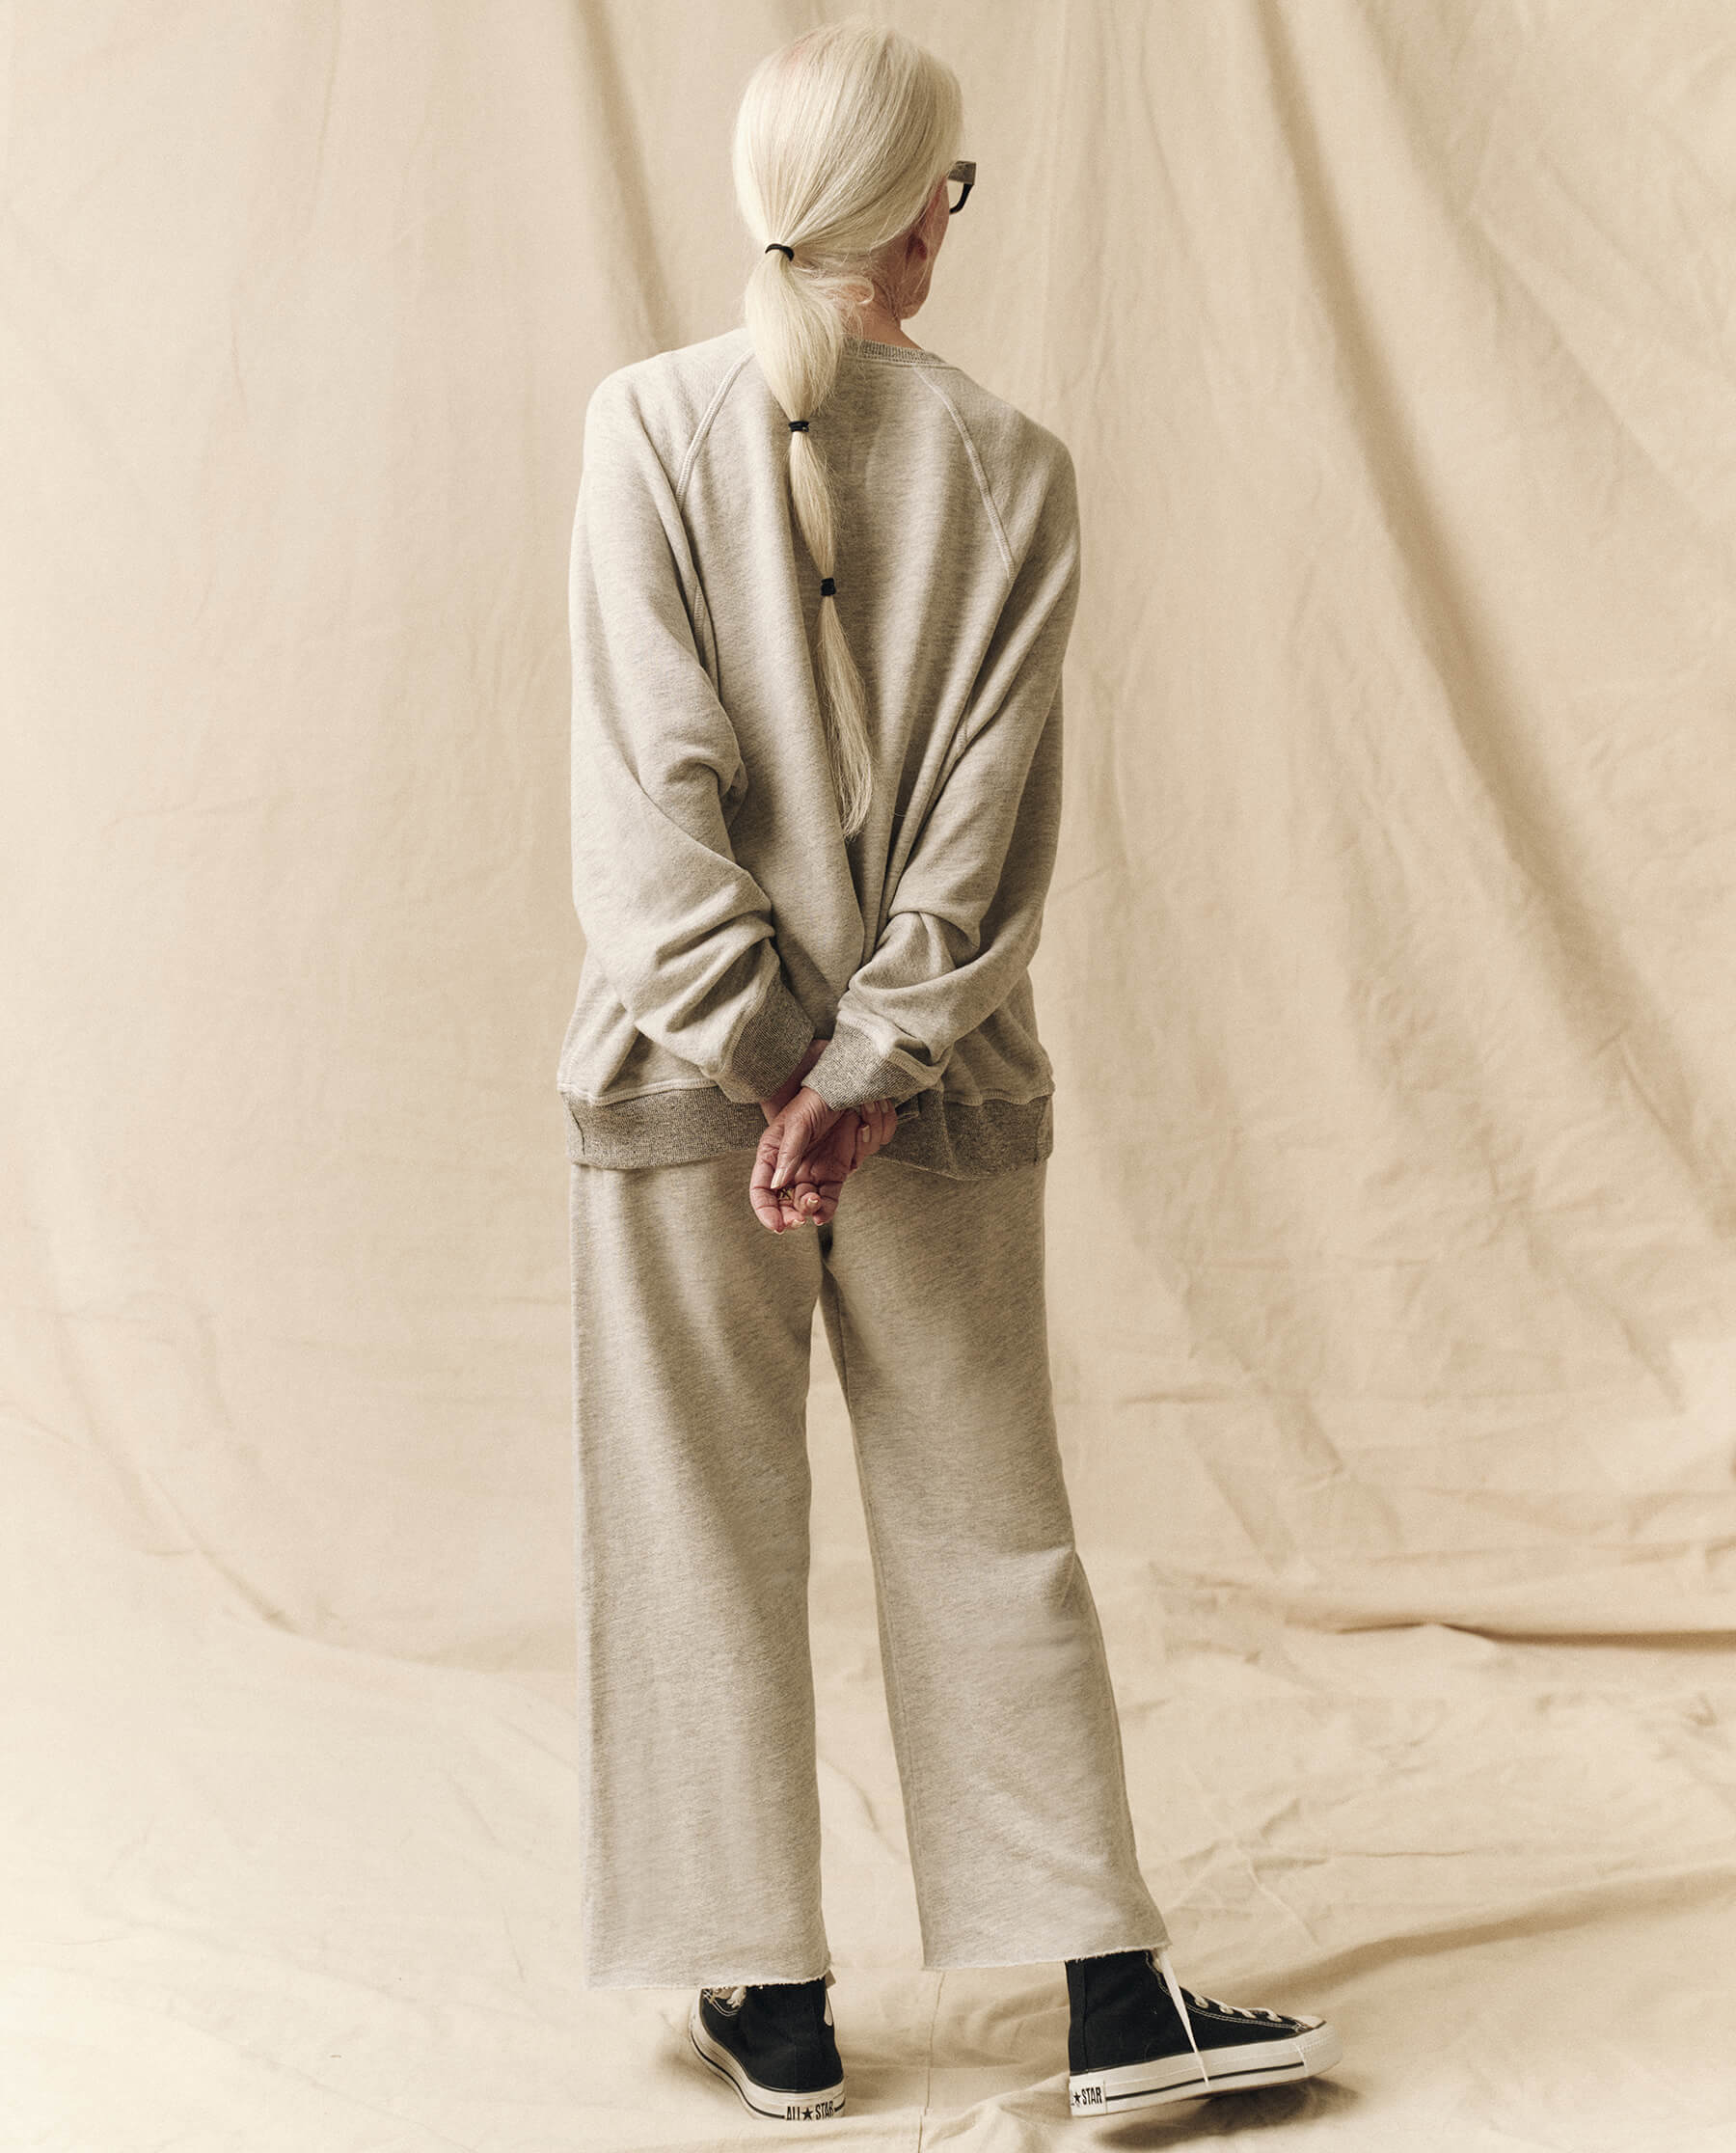 The Wide Leg Cropped Sweatpant. -- Soft Heather Grey SWEATPANTS THE GREAT. FALL 23 SOFT HEATHER GREY